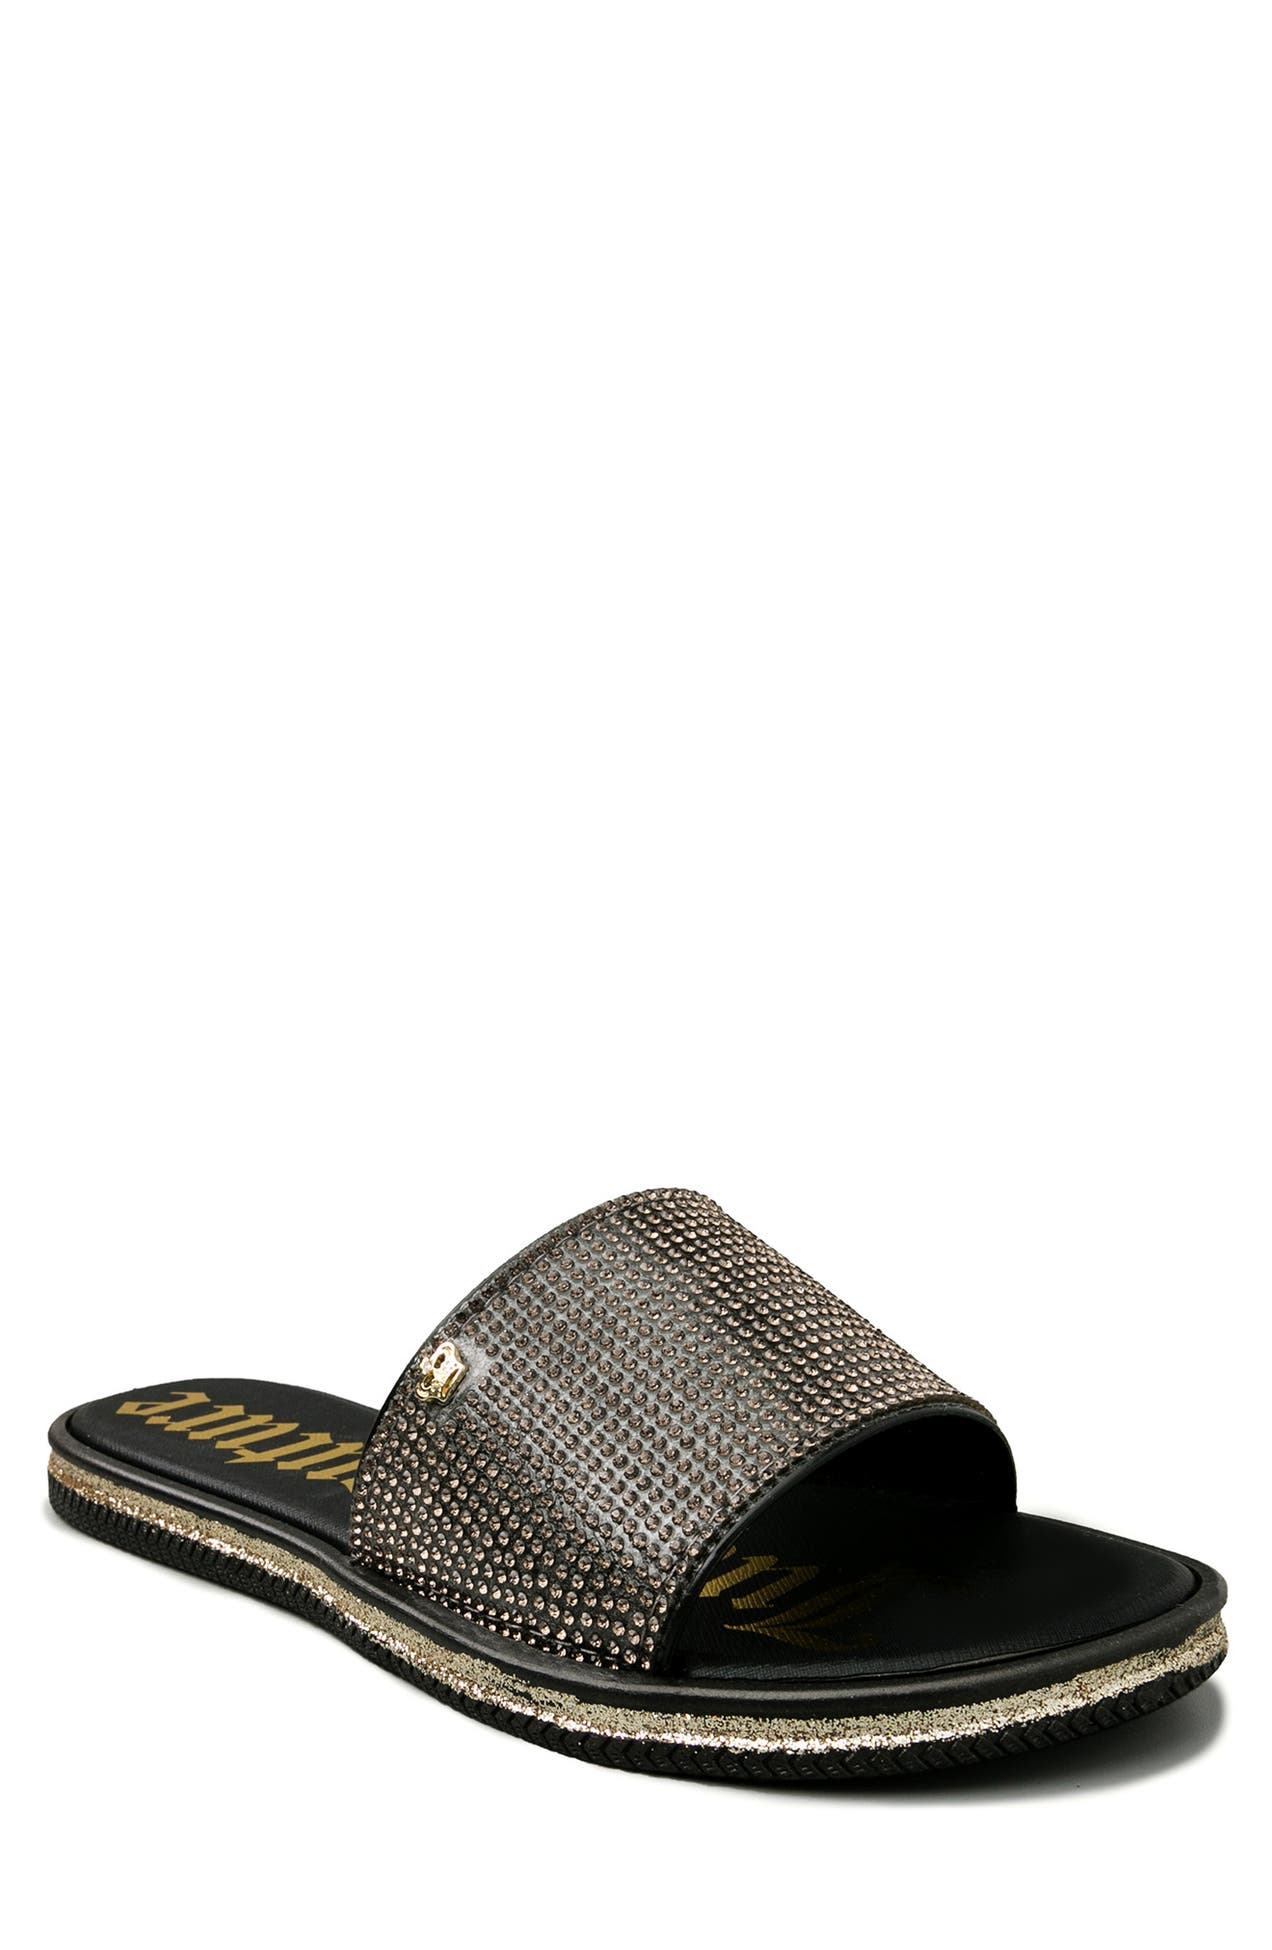 Juicy Couture | Yippy Slide Sandal | Nordstrom Rack